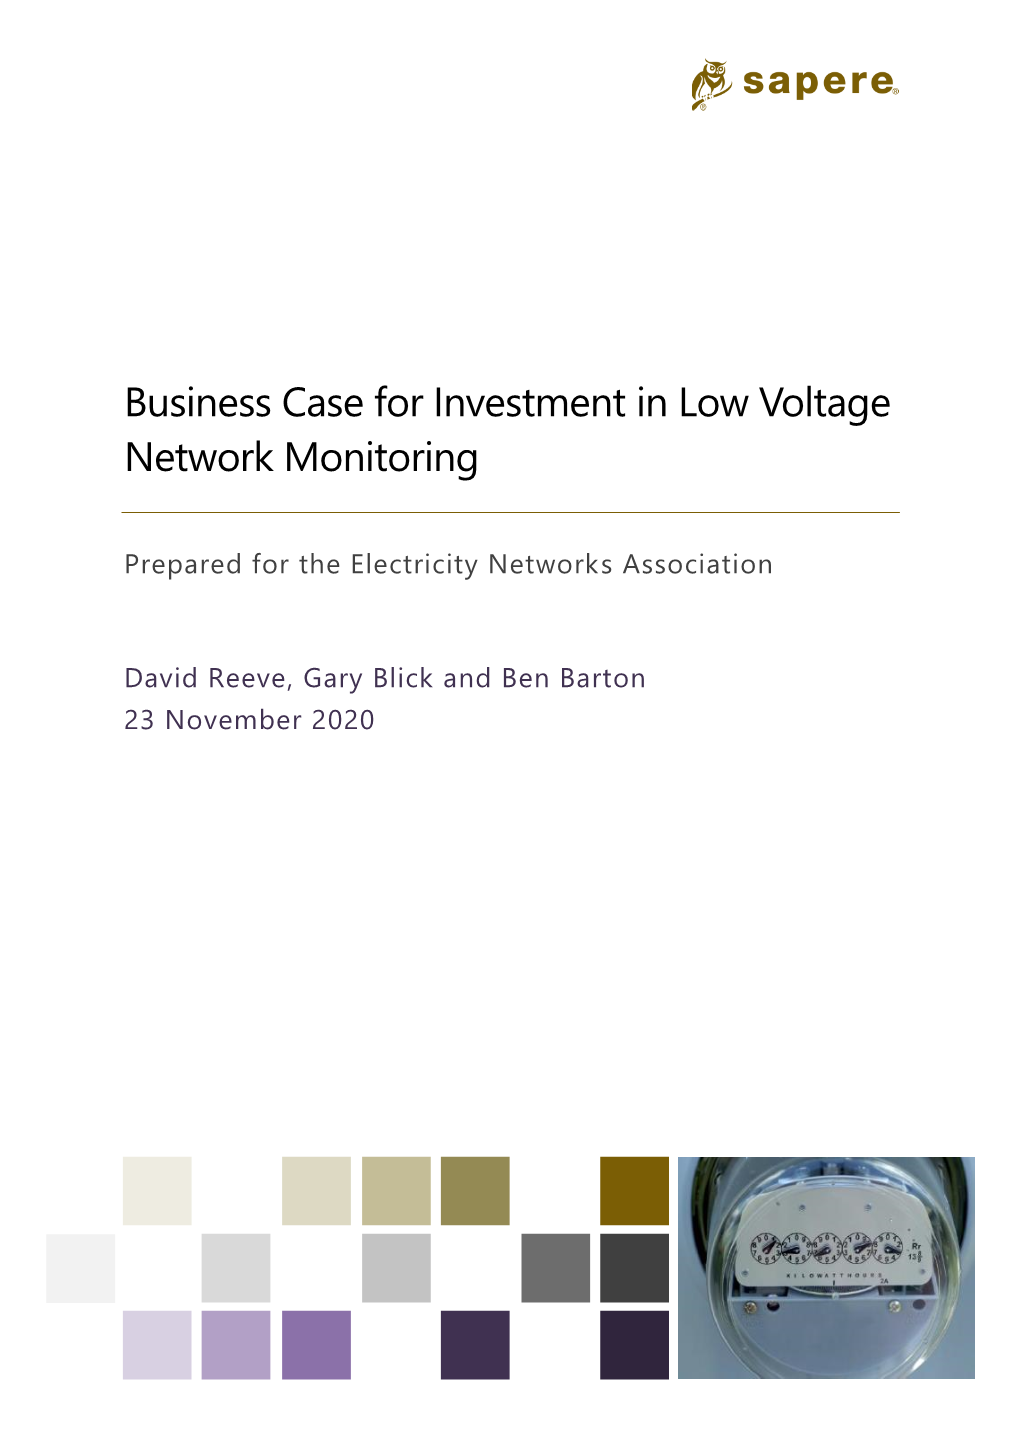 Business Case for Investment in Low Voltage Network Monitoring